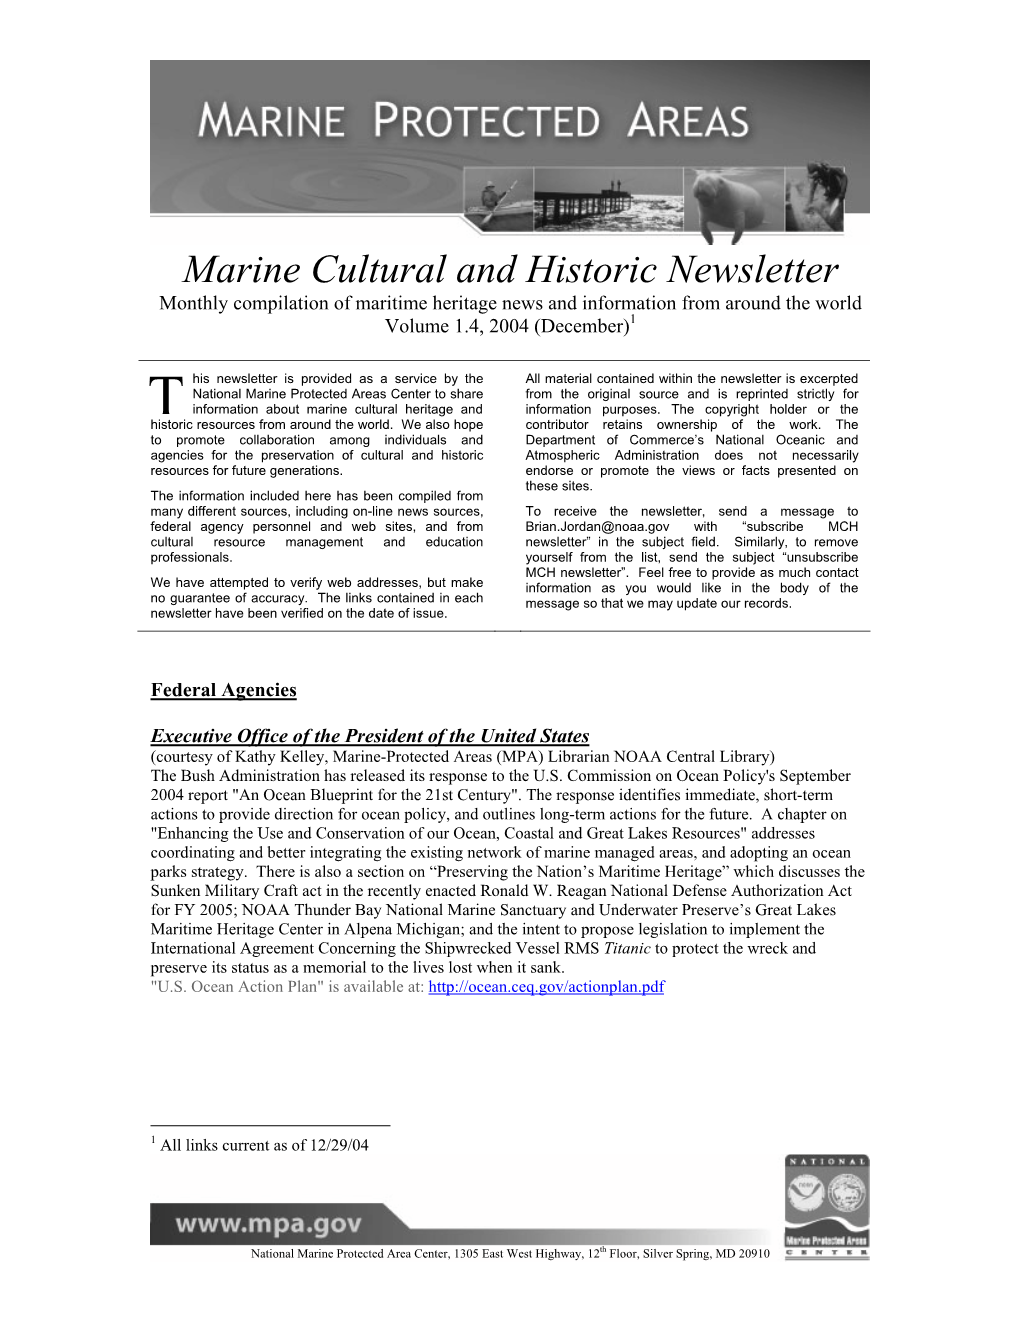 Marine Cultural and Historic Newsletter Monthly Compilation of Maritime Heritage News and Information from Around the World Volume 1.4, 2004 (December)1